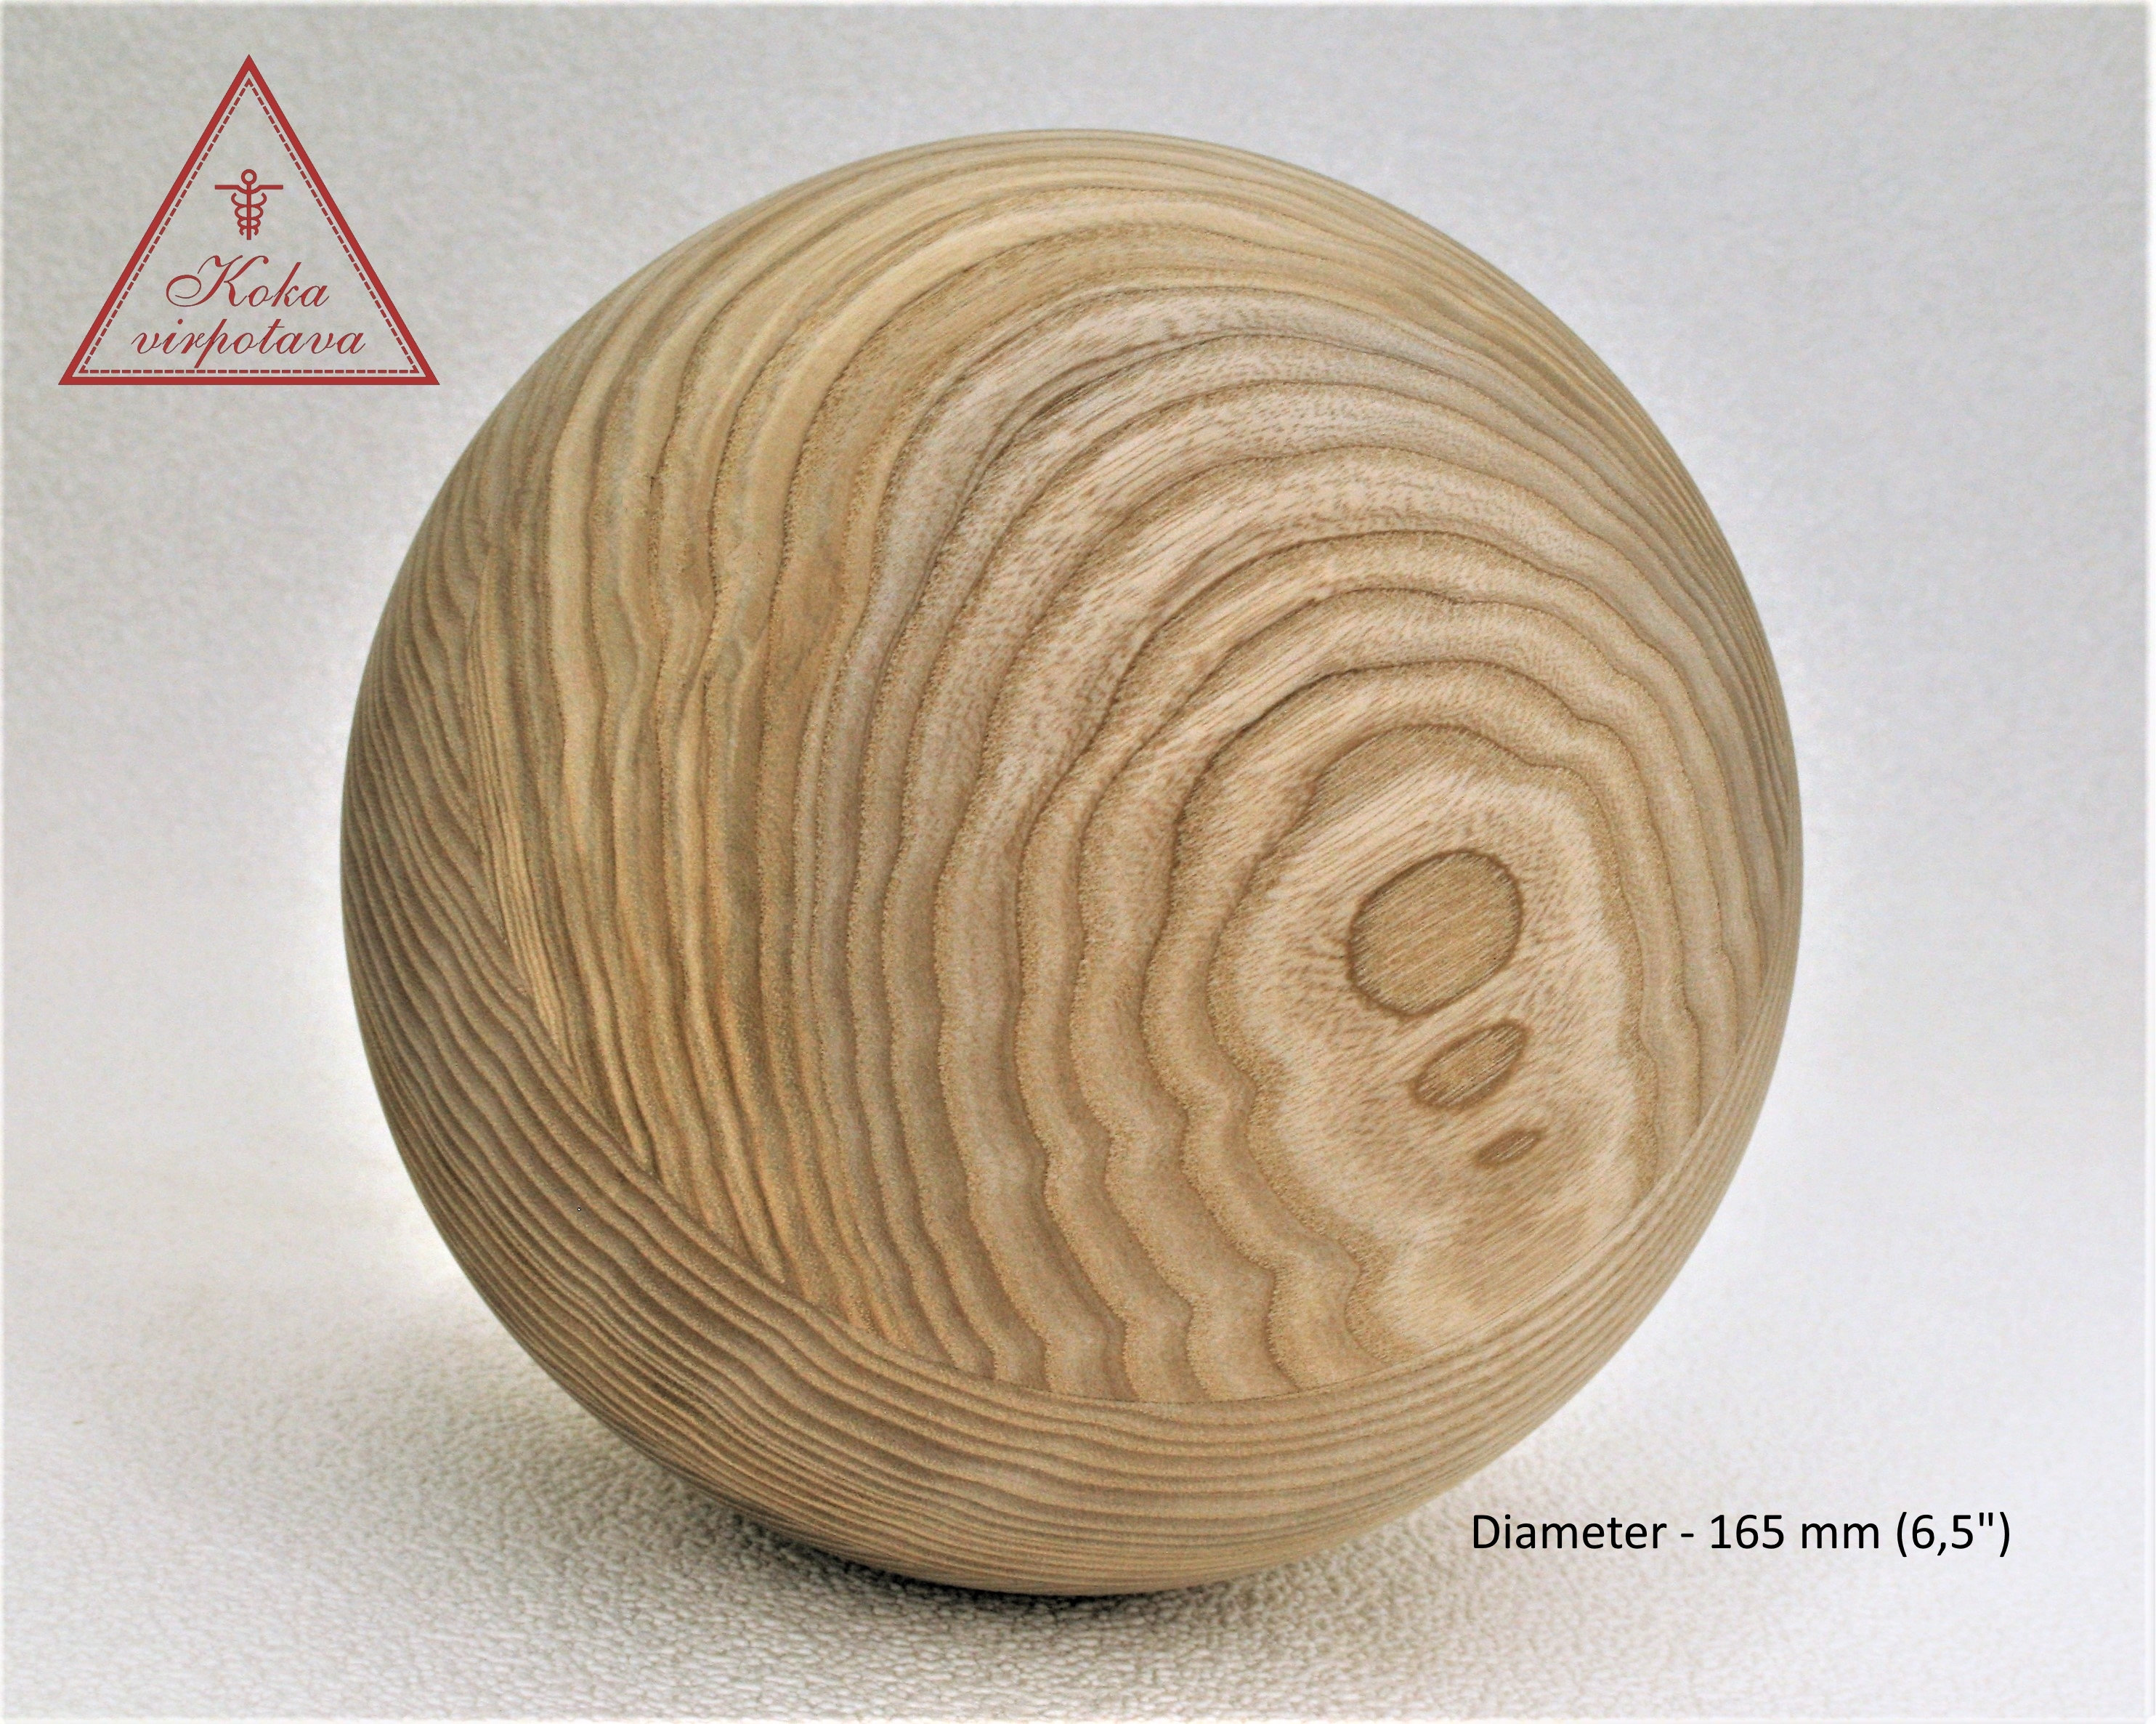 Natural Wooden Balls 5 inch Unfinished Wood Spheres for Crafts Jewelry  Making